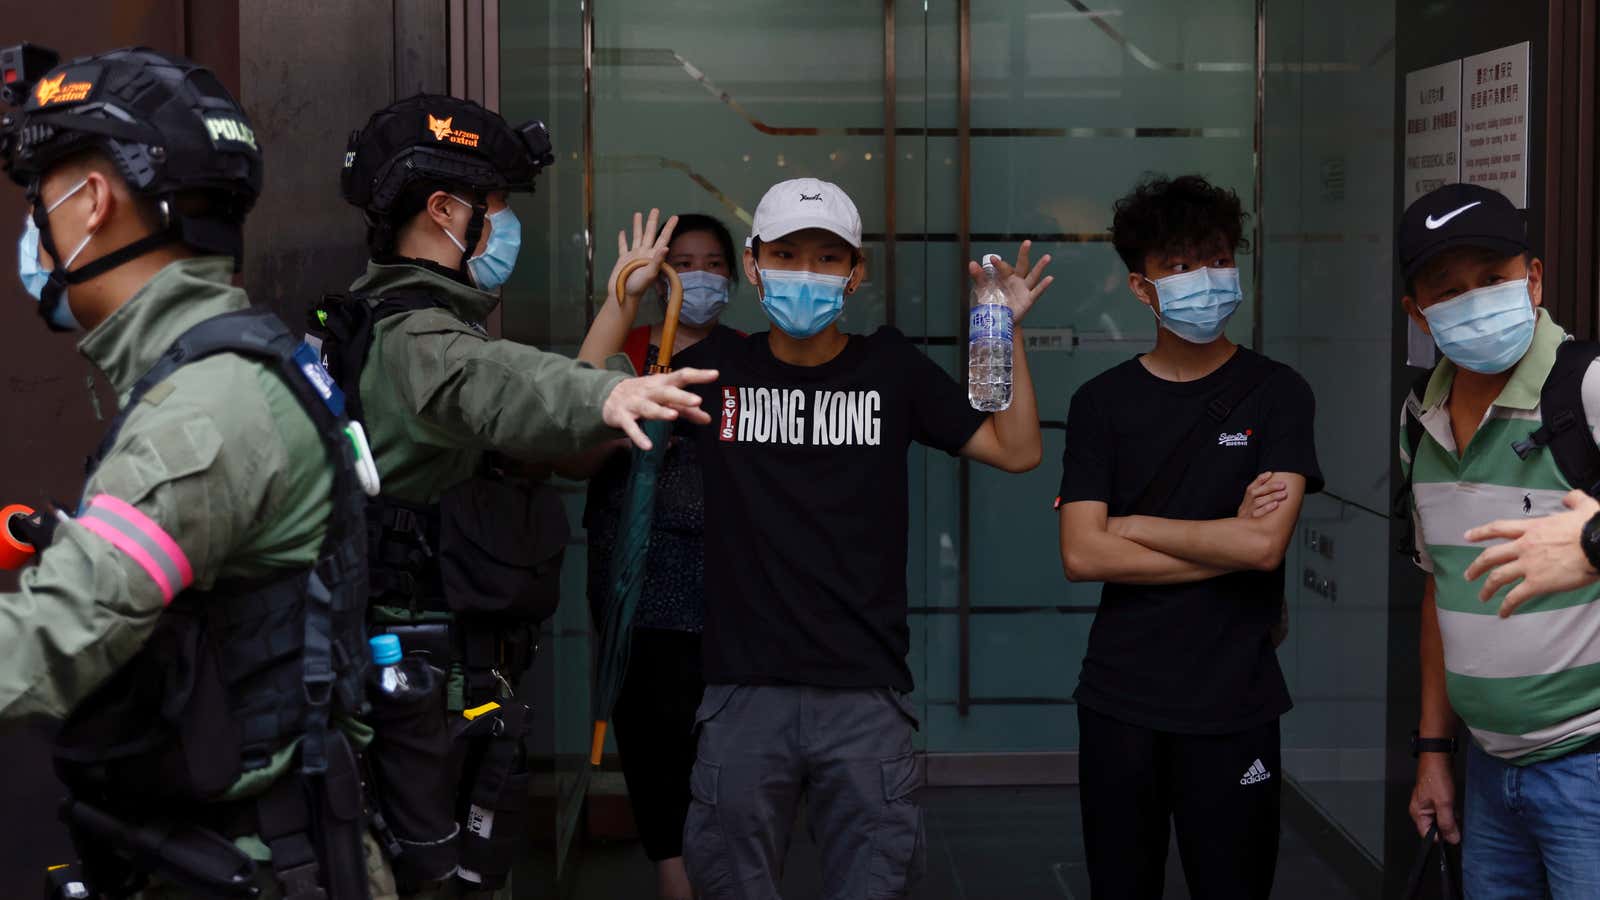 A man raises his hands as police stop to search him during a protest urging the release of twelve Hong Kong activists detained on the…